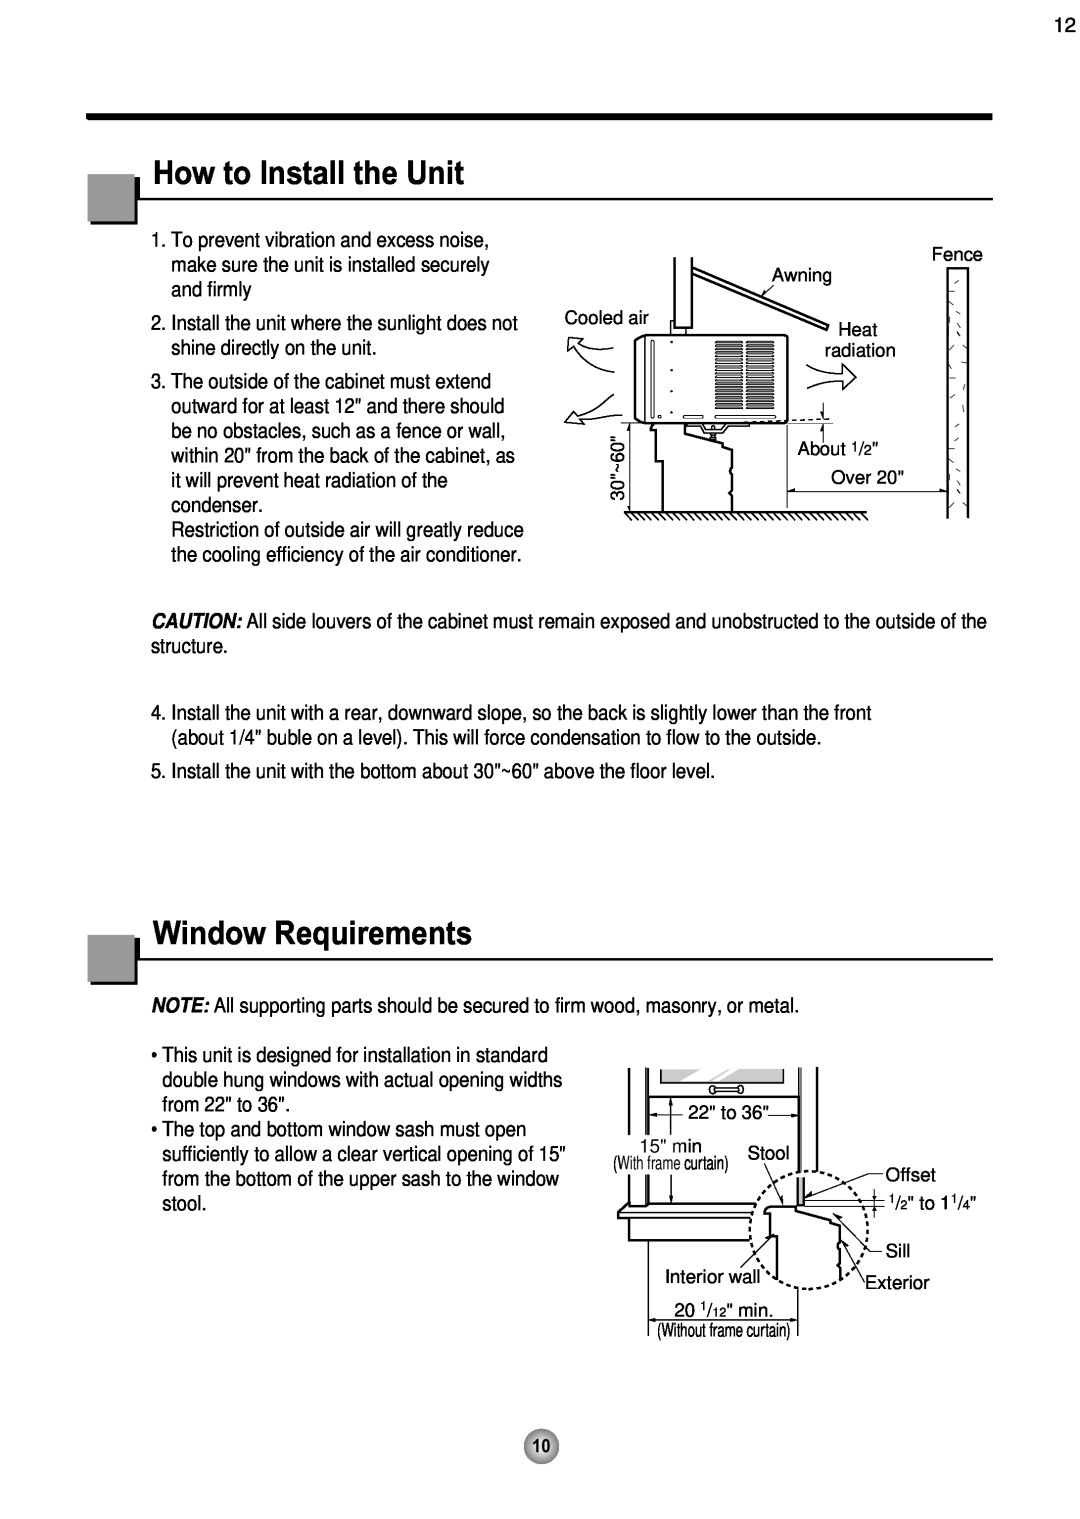 Friedrich CP08 operation manual How to Install the Unit, Window Requirements 